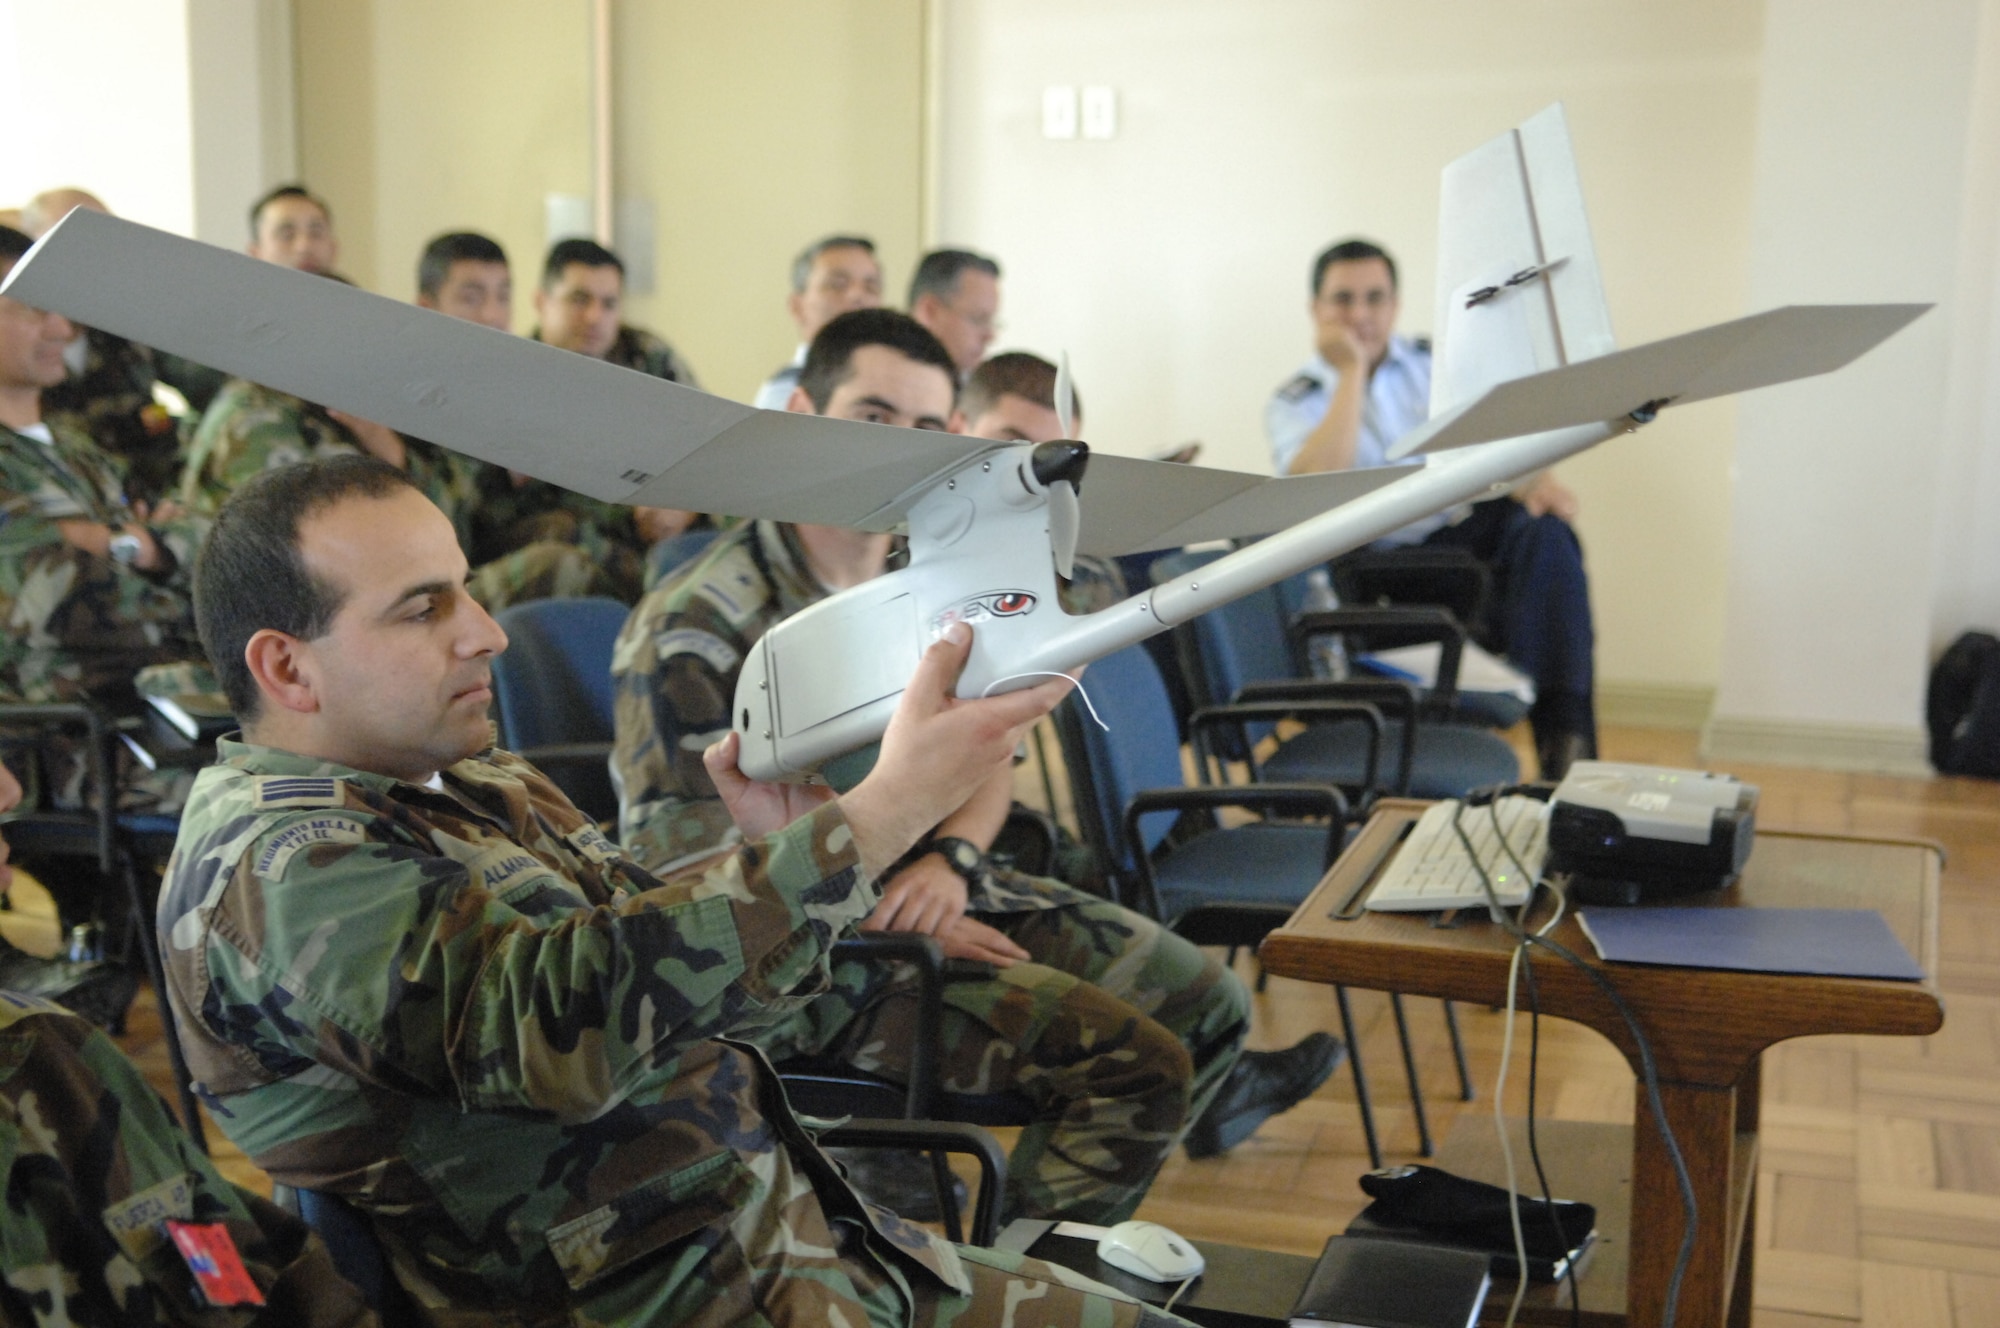 Chilean airmen examine a U.S. Air Force unmanned aerial system Oct. 29 at Quintero Air Base, Chile during an information exchange for Operation Southern Partner. The two-week operation is an in-depth, subject-matter exchange emphasizing partnership, cooperation and sharing of information with partner nation Air Forces in Latin America. (U.S. Air Force Photo/Tech. Sgt. Roy Santana)